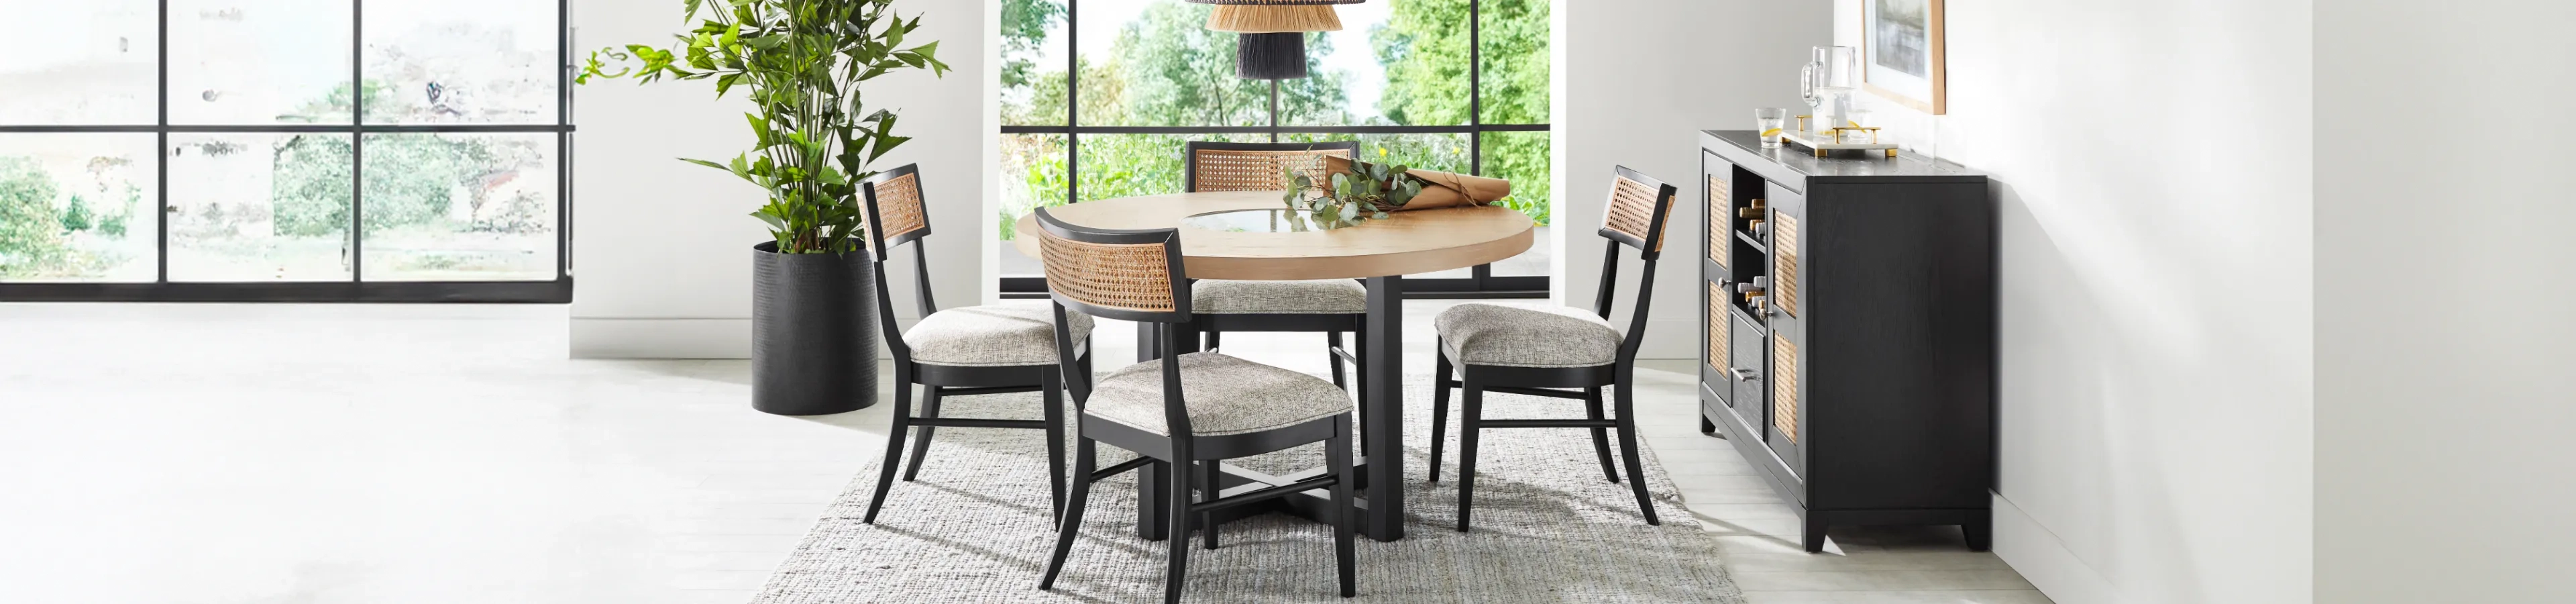 dining room with black chairs and brown and black table 